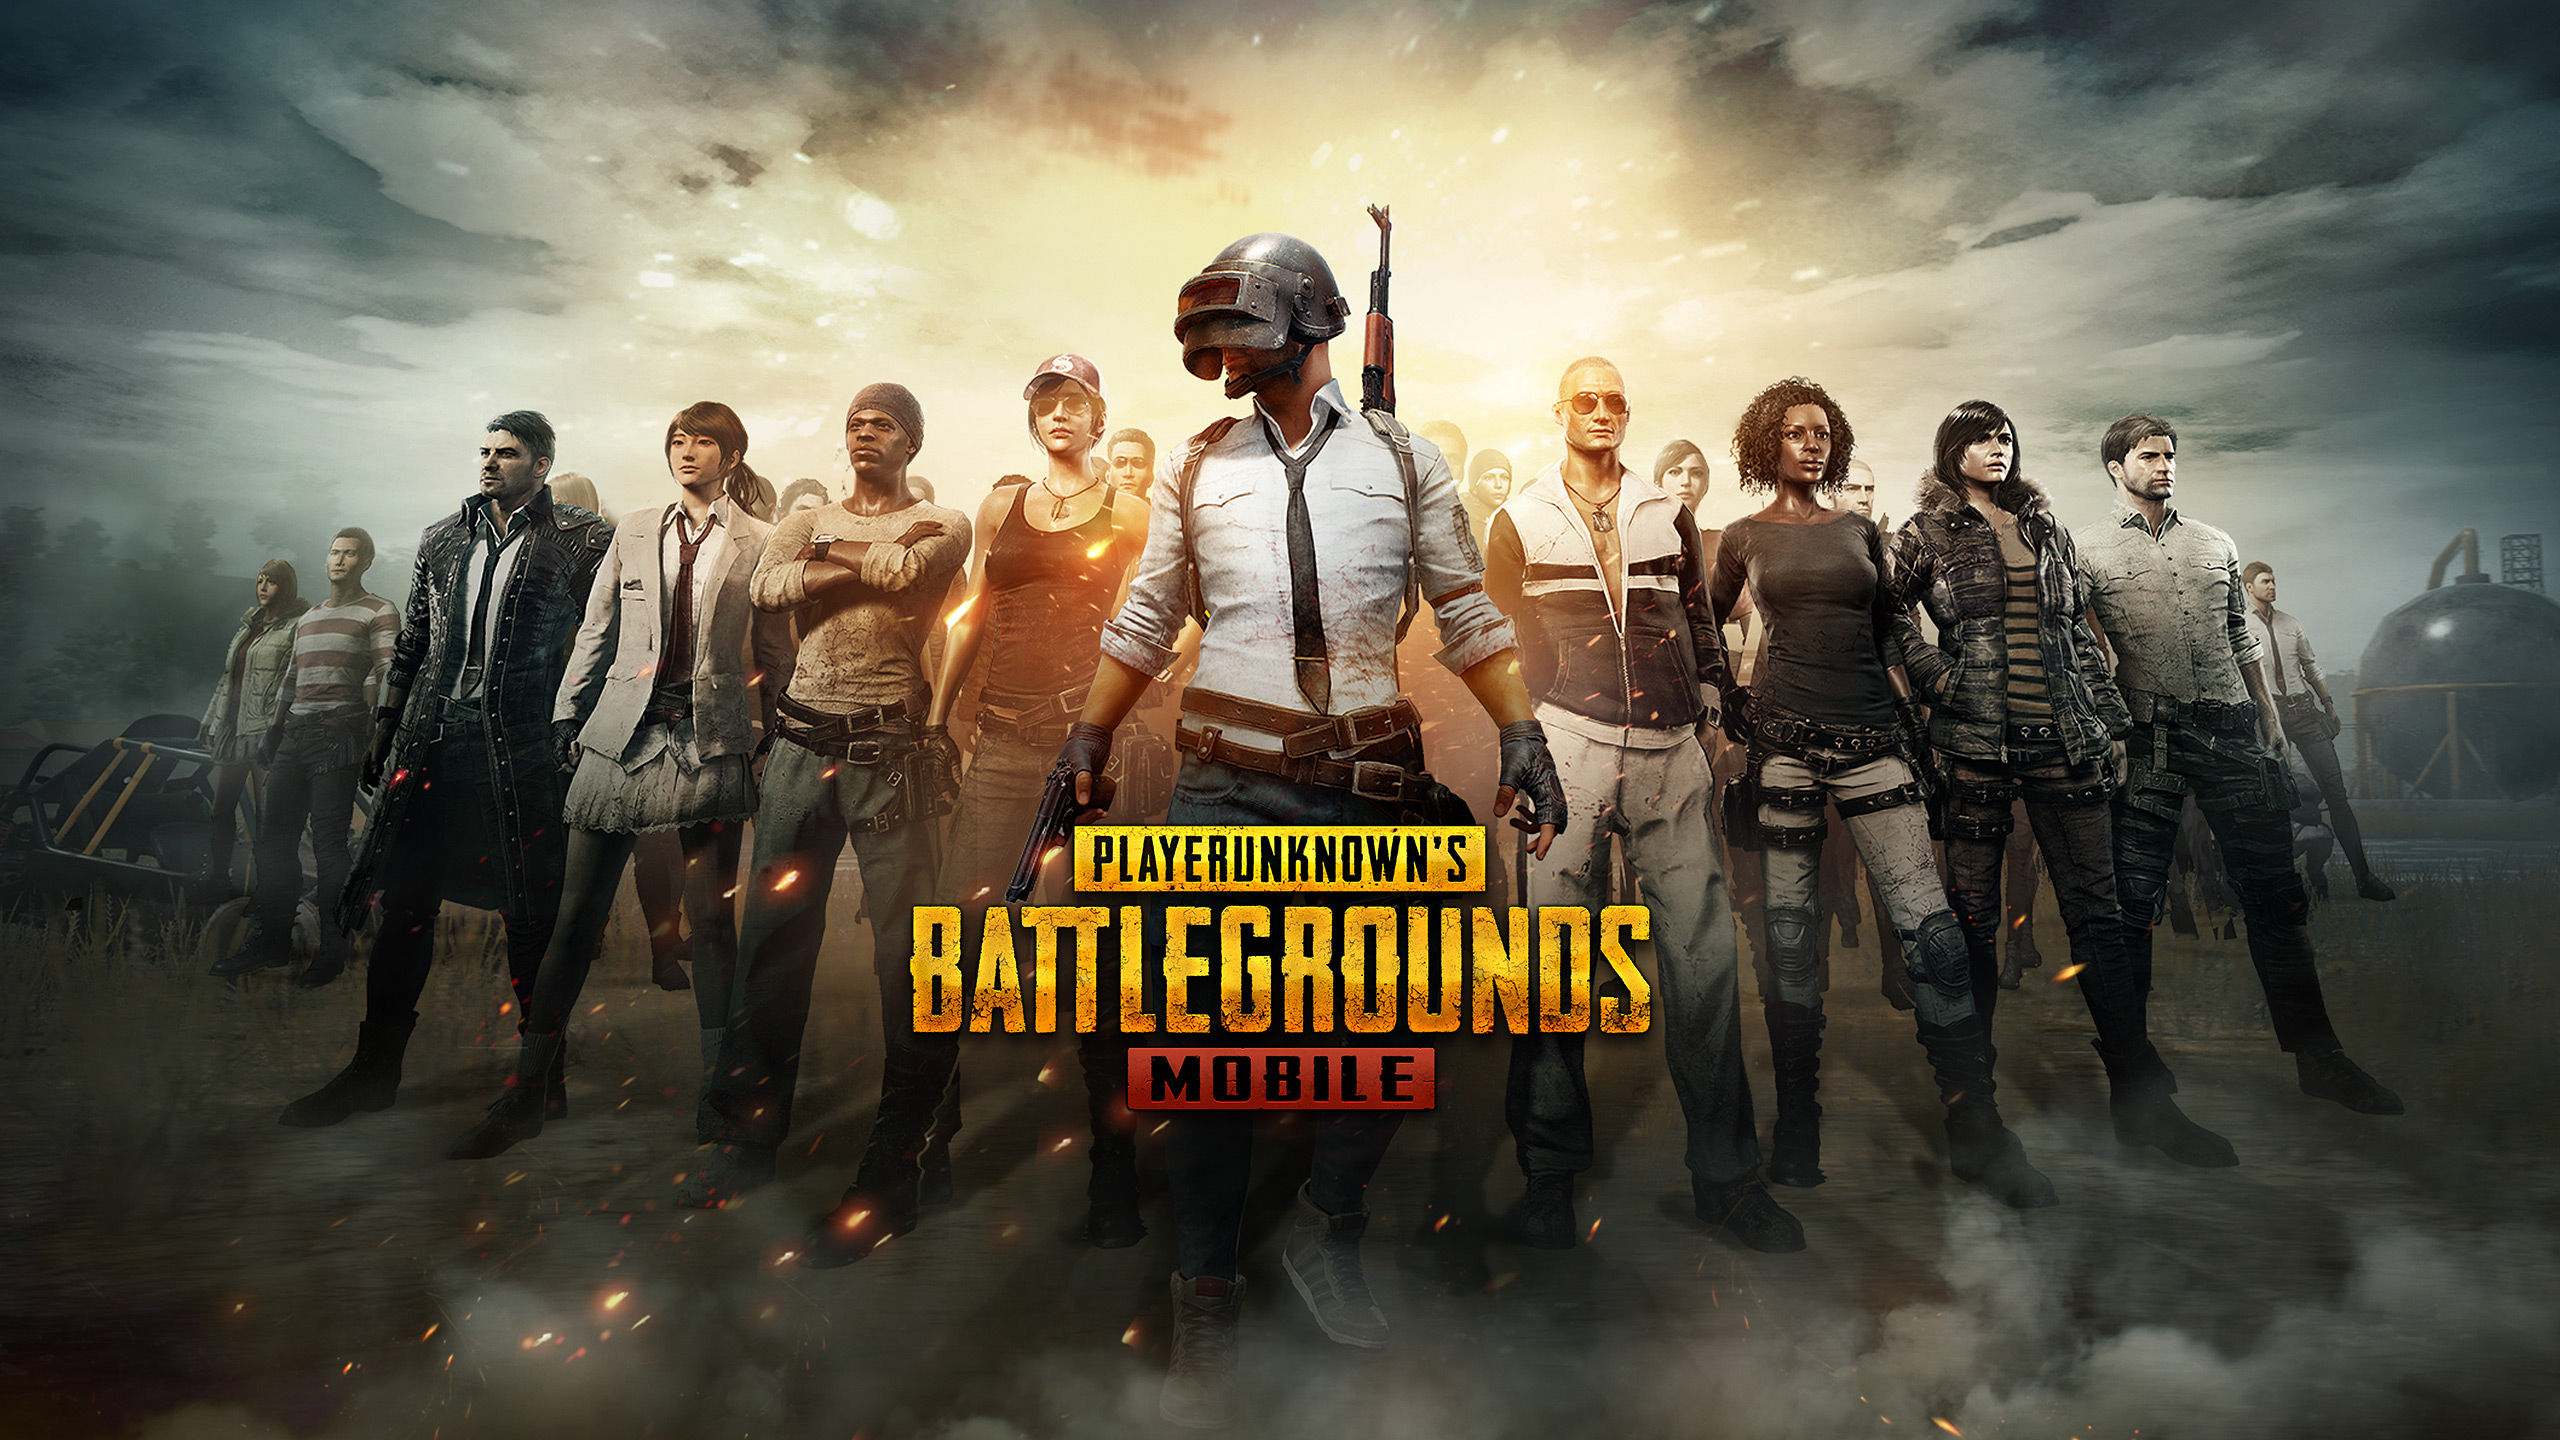 Pubg Mobile, Android Game, Characters, Wallpaper - Pubg Mobile - HD Wallpaper 